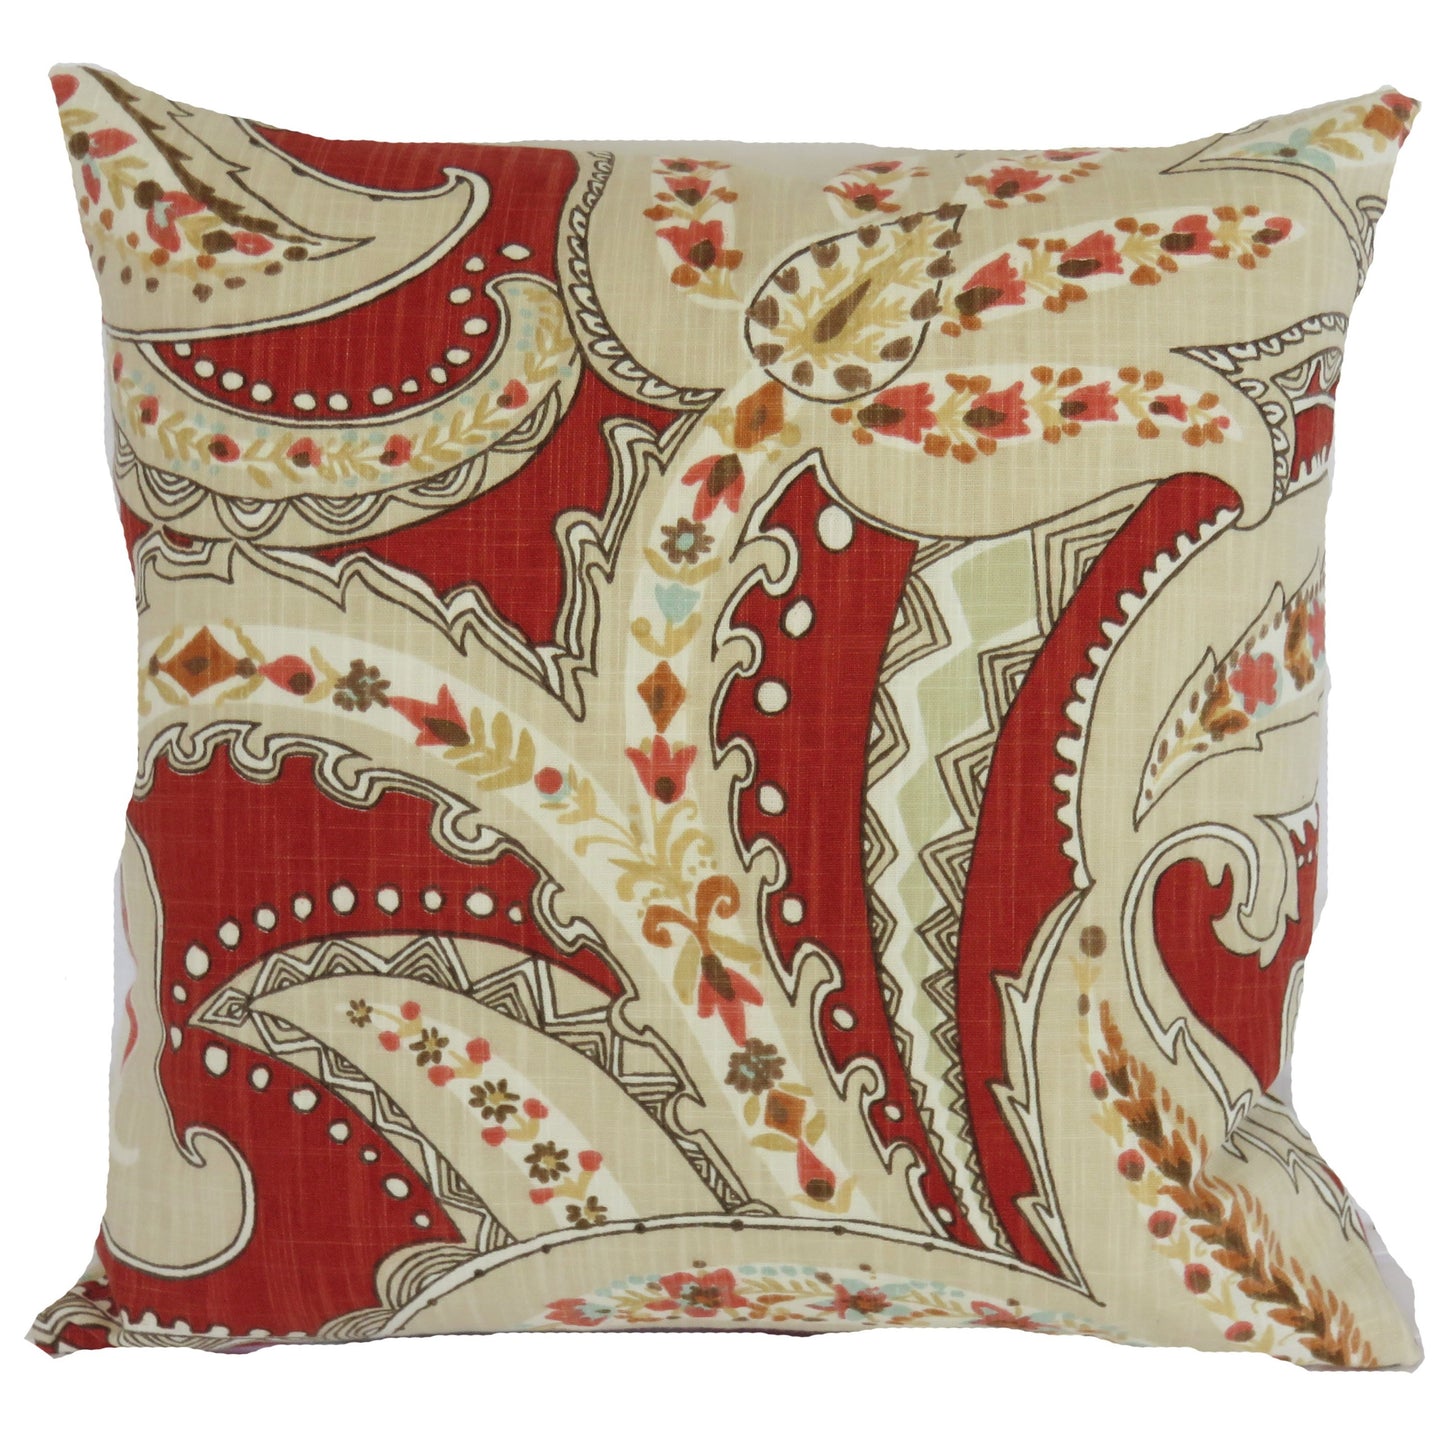 rust paisley pillow cover large scale cotton print with beige